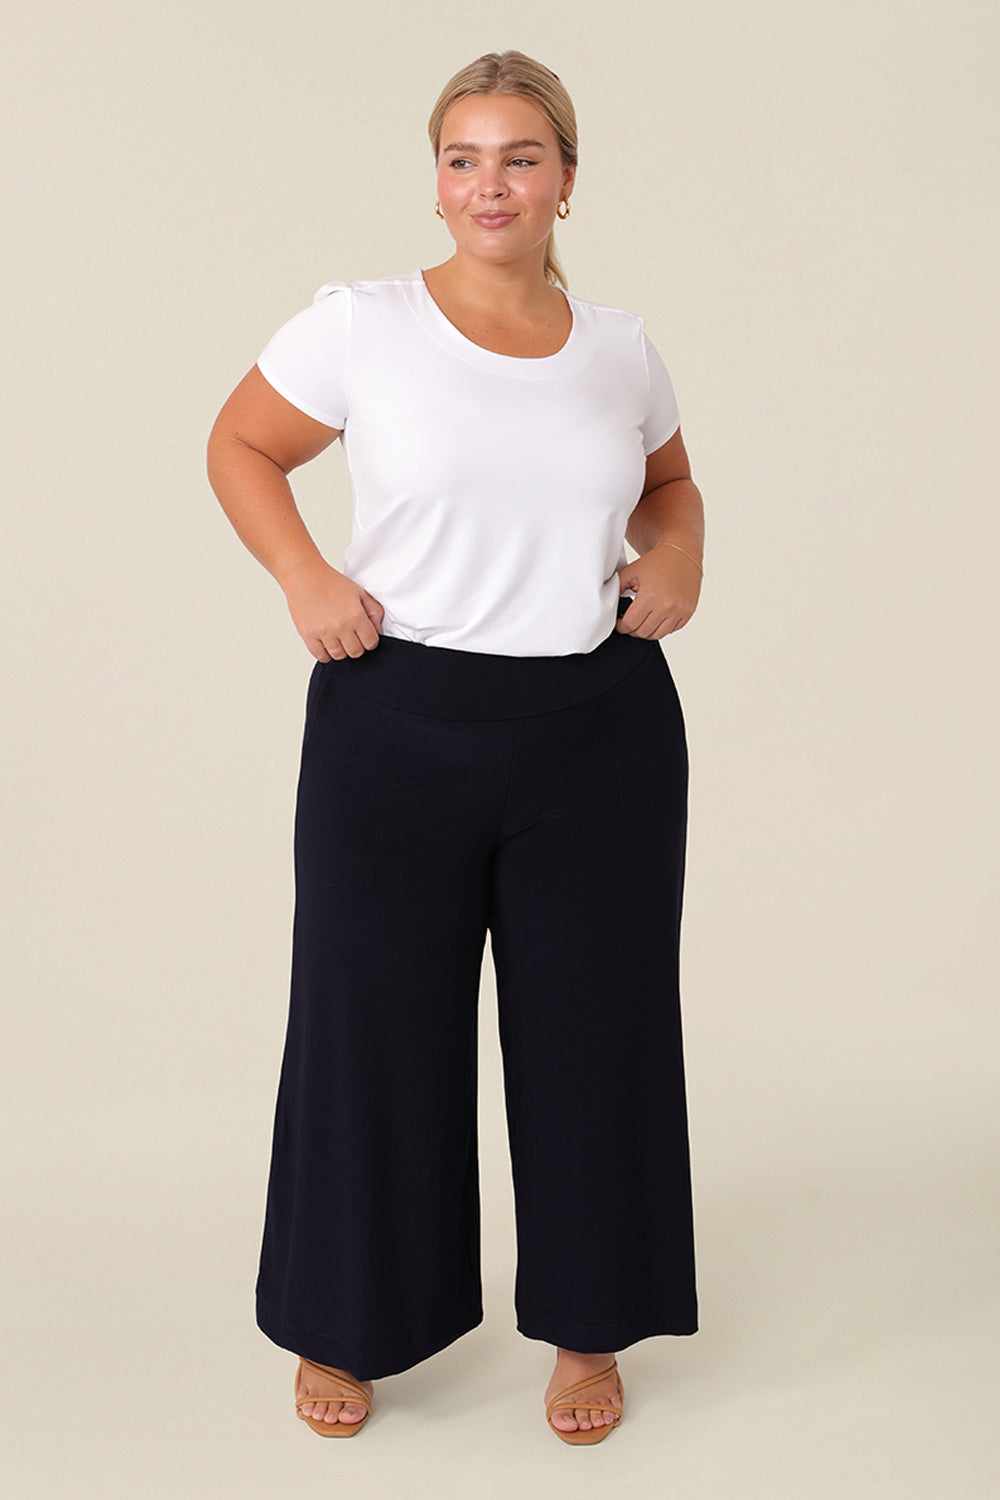 Good pants for petite women, a curvy, size 16 woman wears black culotte pants by Australian fashion brand, Leina & Fleur. Cropped trousers with a stretchy, pull on waistband, these easy-care wide leg pants are worn with a short sleeve top in white bamboo jersey.